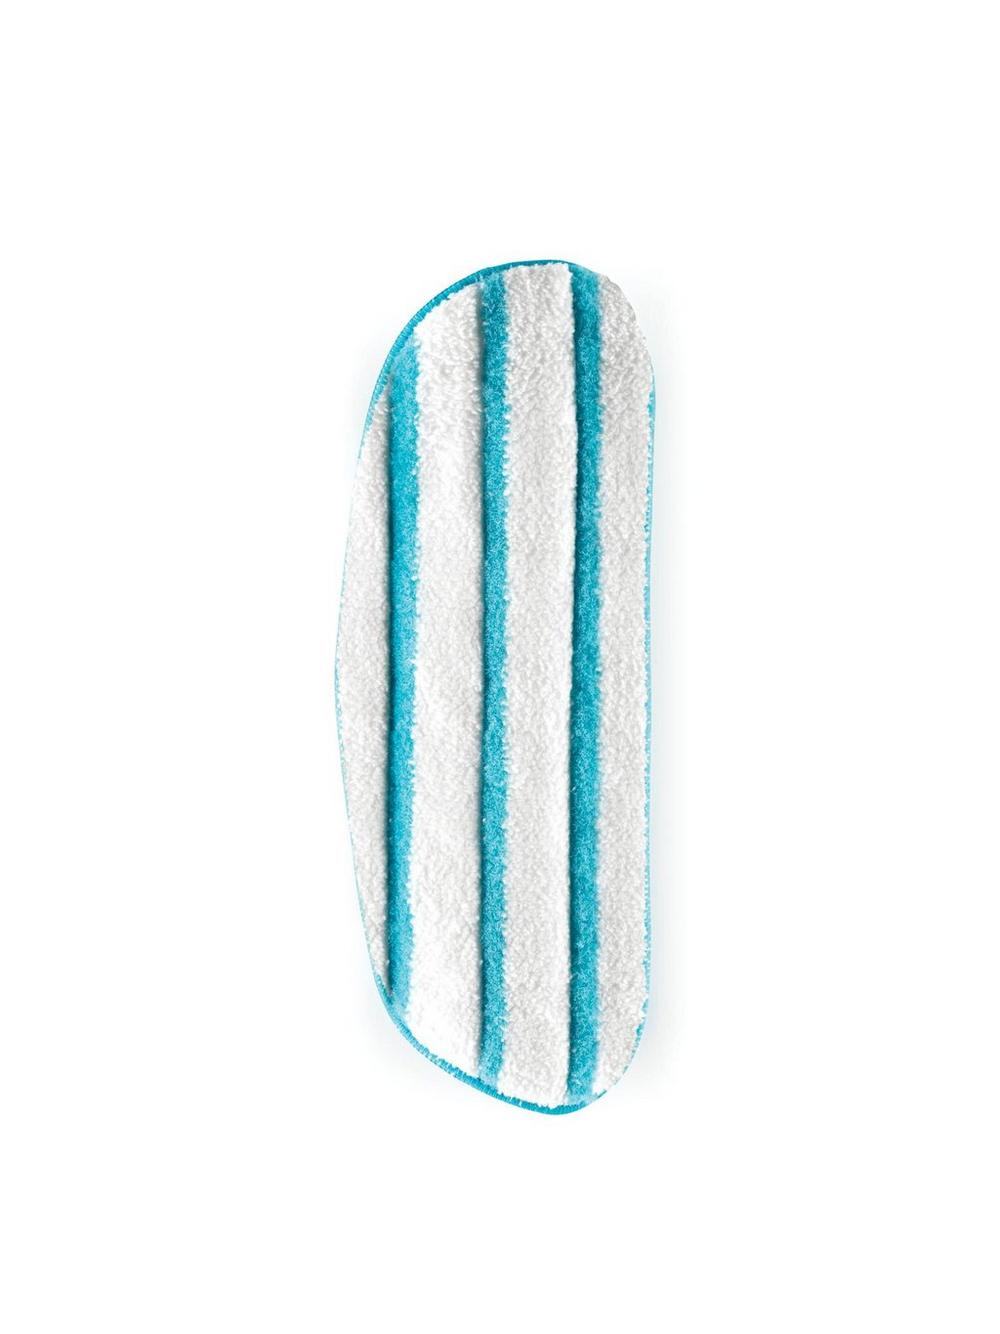 Shoppers Call This Tile Scrubber a 'Back Saver